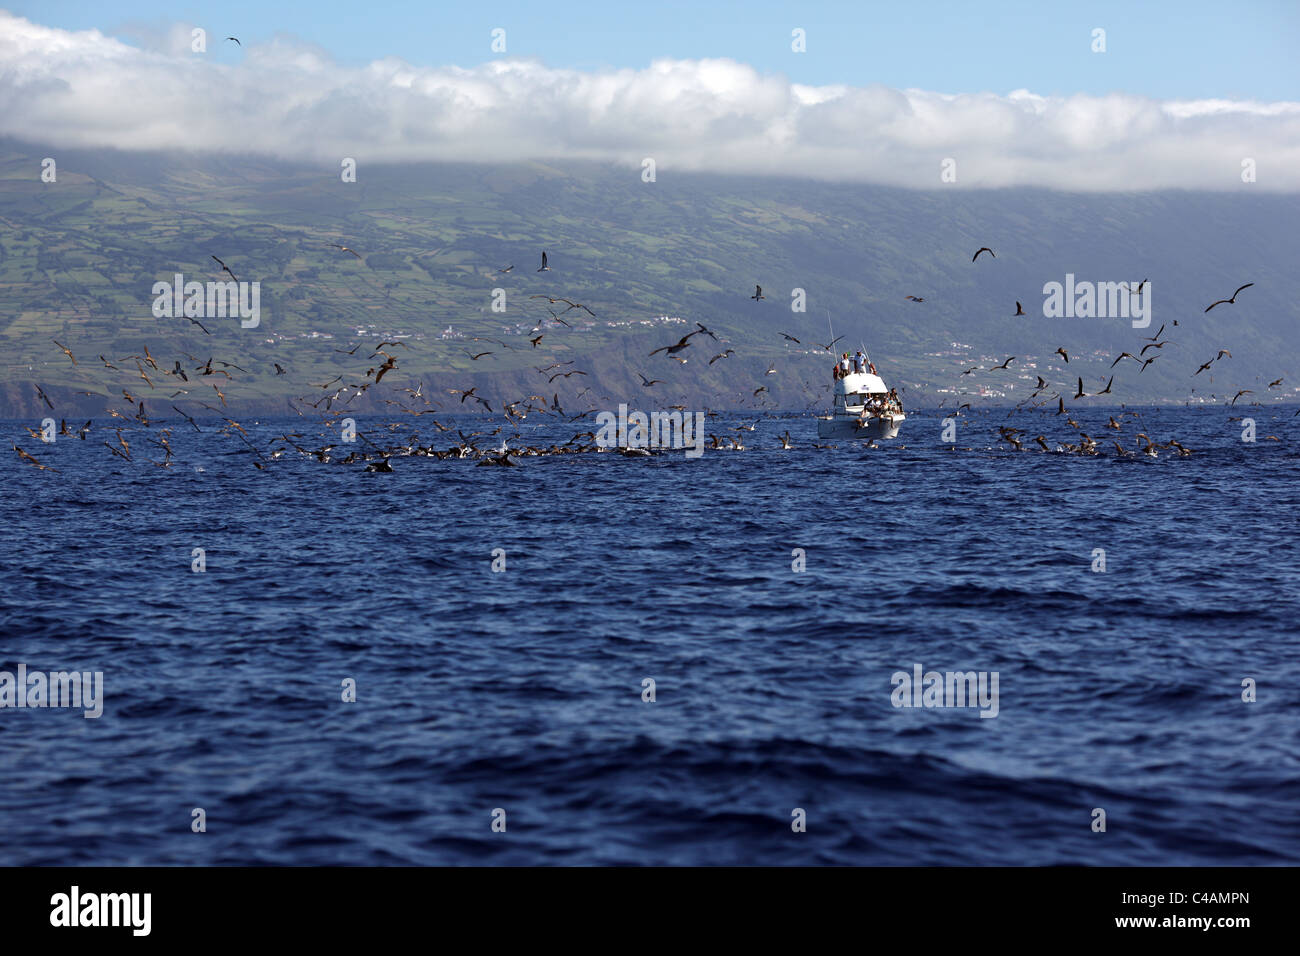 Several Cory's shearwater and dolphins on a mackerel feeding frenzy, off Pico island, seen by people on a whale watching boat Stock Photo